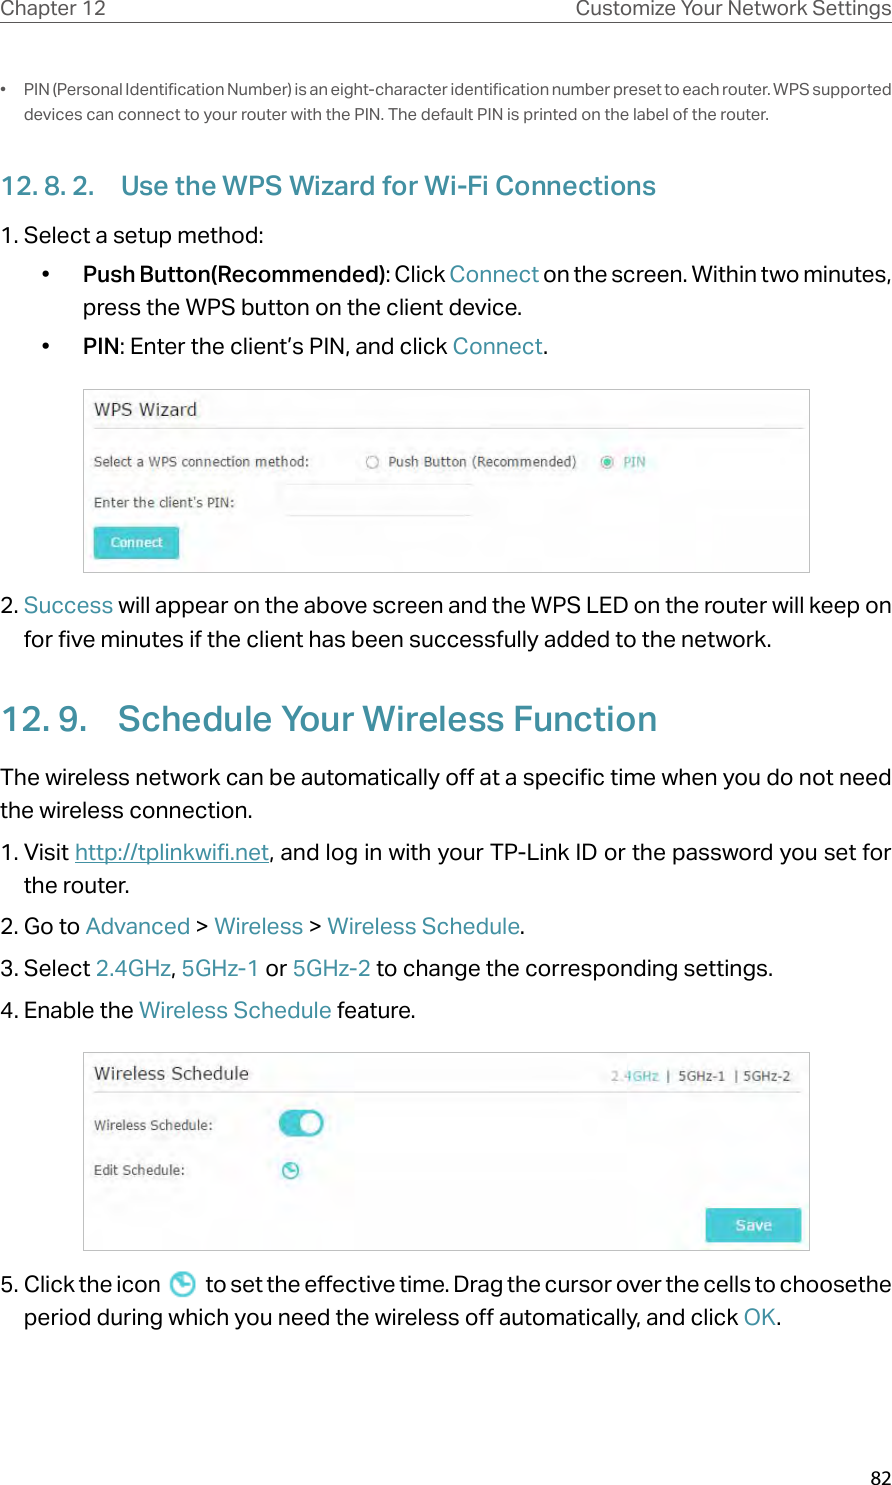 82Chapter 12 Customize Your Network Settings•  PIN (Personal Identification Number) is an eight-character identification number preset to each router. WPS supported devices can connect to your router with the PIN. The default PIN is printed on the label of the router.12. 8. 2.  Use the WPS Wizard for Wi-Fi Connections1. Select a setup method: •  Push Button(Recommended): Click Connect on the screen. Within two minutes, press the WPS button on the client device.•  PIN: Enter the client’s PIN, and click Connect.2. Success will appear on the above screen and the WPS LED on the router will keep on for five minutes if the client has been successfully added to the network.12. 9.  Schedule Your Wireless FunctionThe wireless network can be automatically off at a specific time when you do not need the wireless connection.1. Visit http://tplinkwifi.net, and log in with your TP-Link ID or the password you set for the router.2. Go to Advanced &gt; Wireless &gt; Wireless Schedule.3. Select 2.4GHz, 5GHz-1 or 5GHz-2 to change the corresponding settings.4. Enable the Wireless Schedule feature.5. Click the icon   to set the effective time. Drag the cursor over the cells to choosethe period during which you need the wireless off automatically, and click OK.